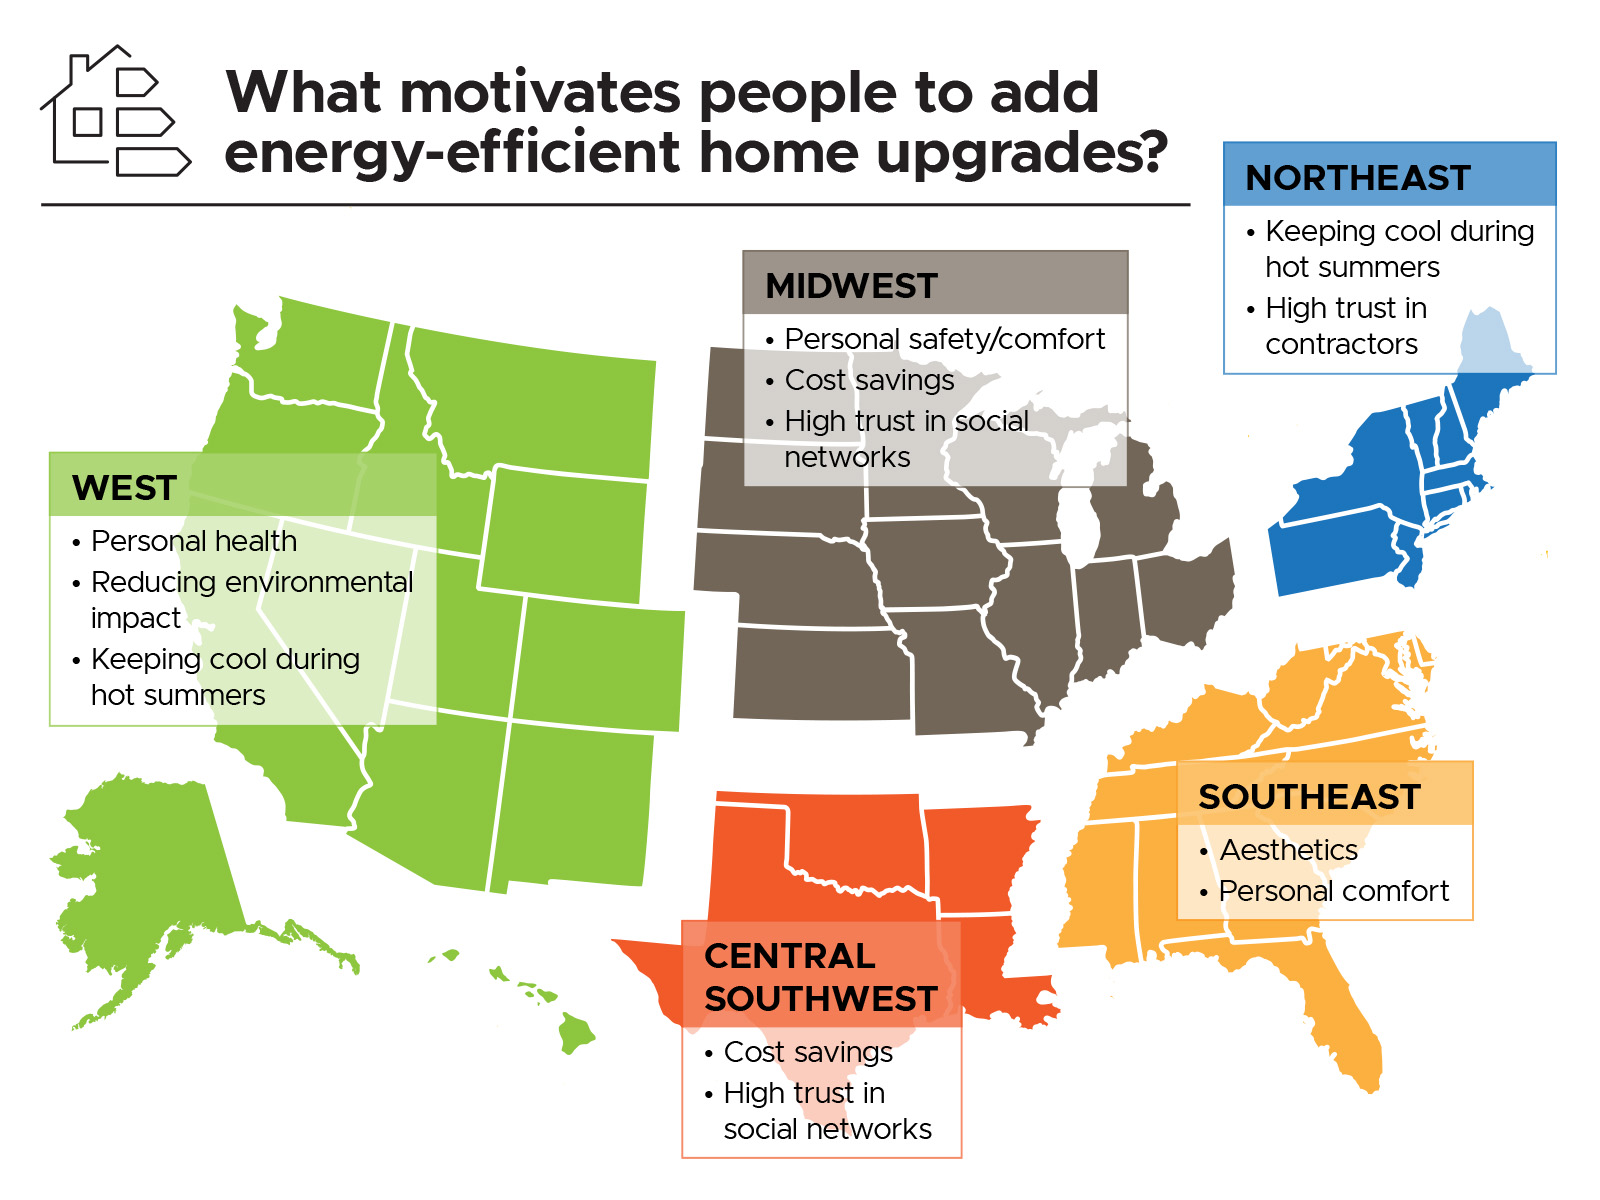 Graphic is titled "What motivates people to add energy-efficient home upgrades?" It shows the US split into 5 regions: West, listing "Personal health, reducing environmental impact, keeping cool during summers;" MIdwest: Personal safety/comfort, cost savings, high trust in social networks; Northeast: Keeping cool during summers, high trust in contractors; Southeast: aesthetics, personal comfort; Central southwest: cost savings, high trust in social networks